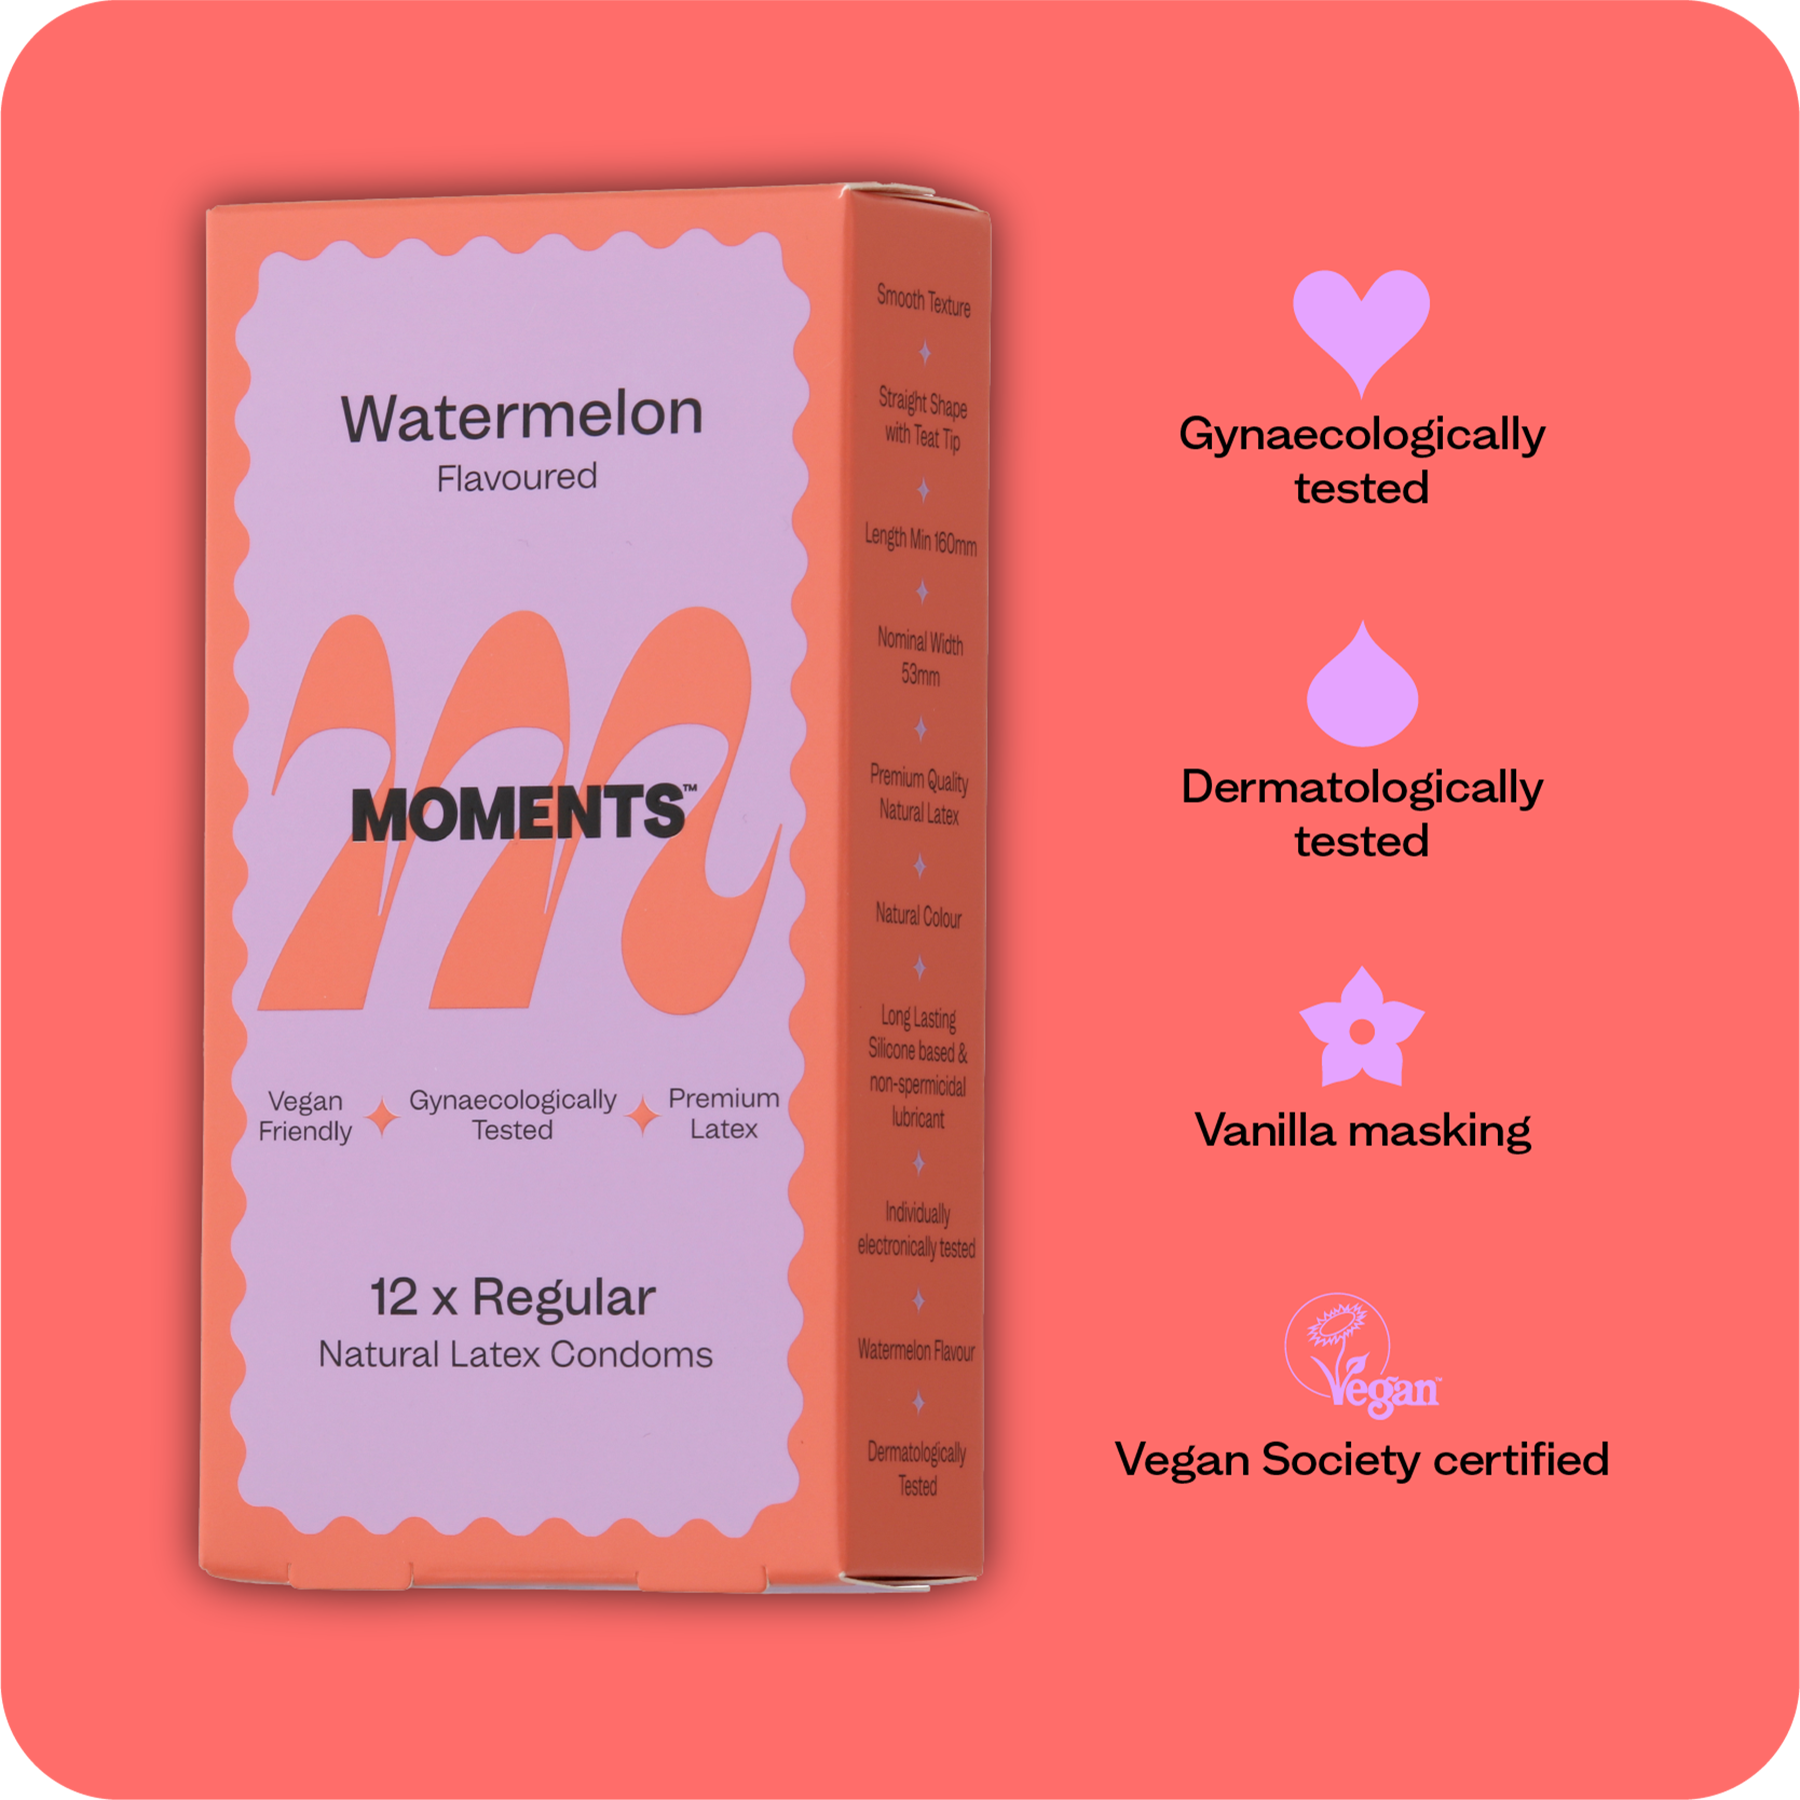 Moments Watermelon flavoured condom with emphasis on vegan ingredients and gynaecologically tested